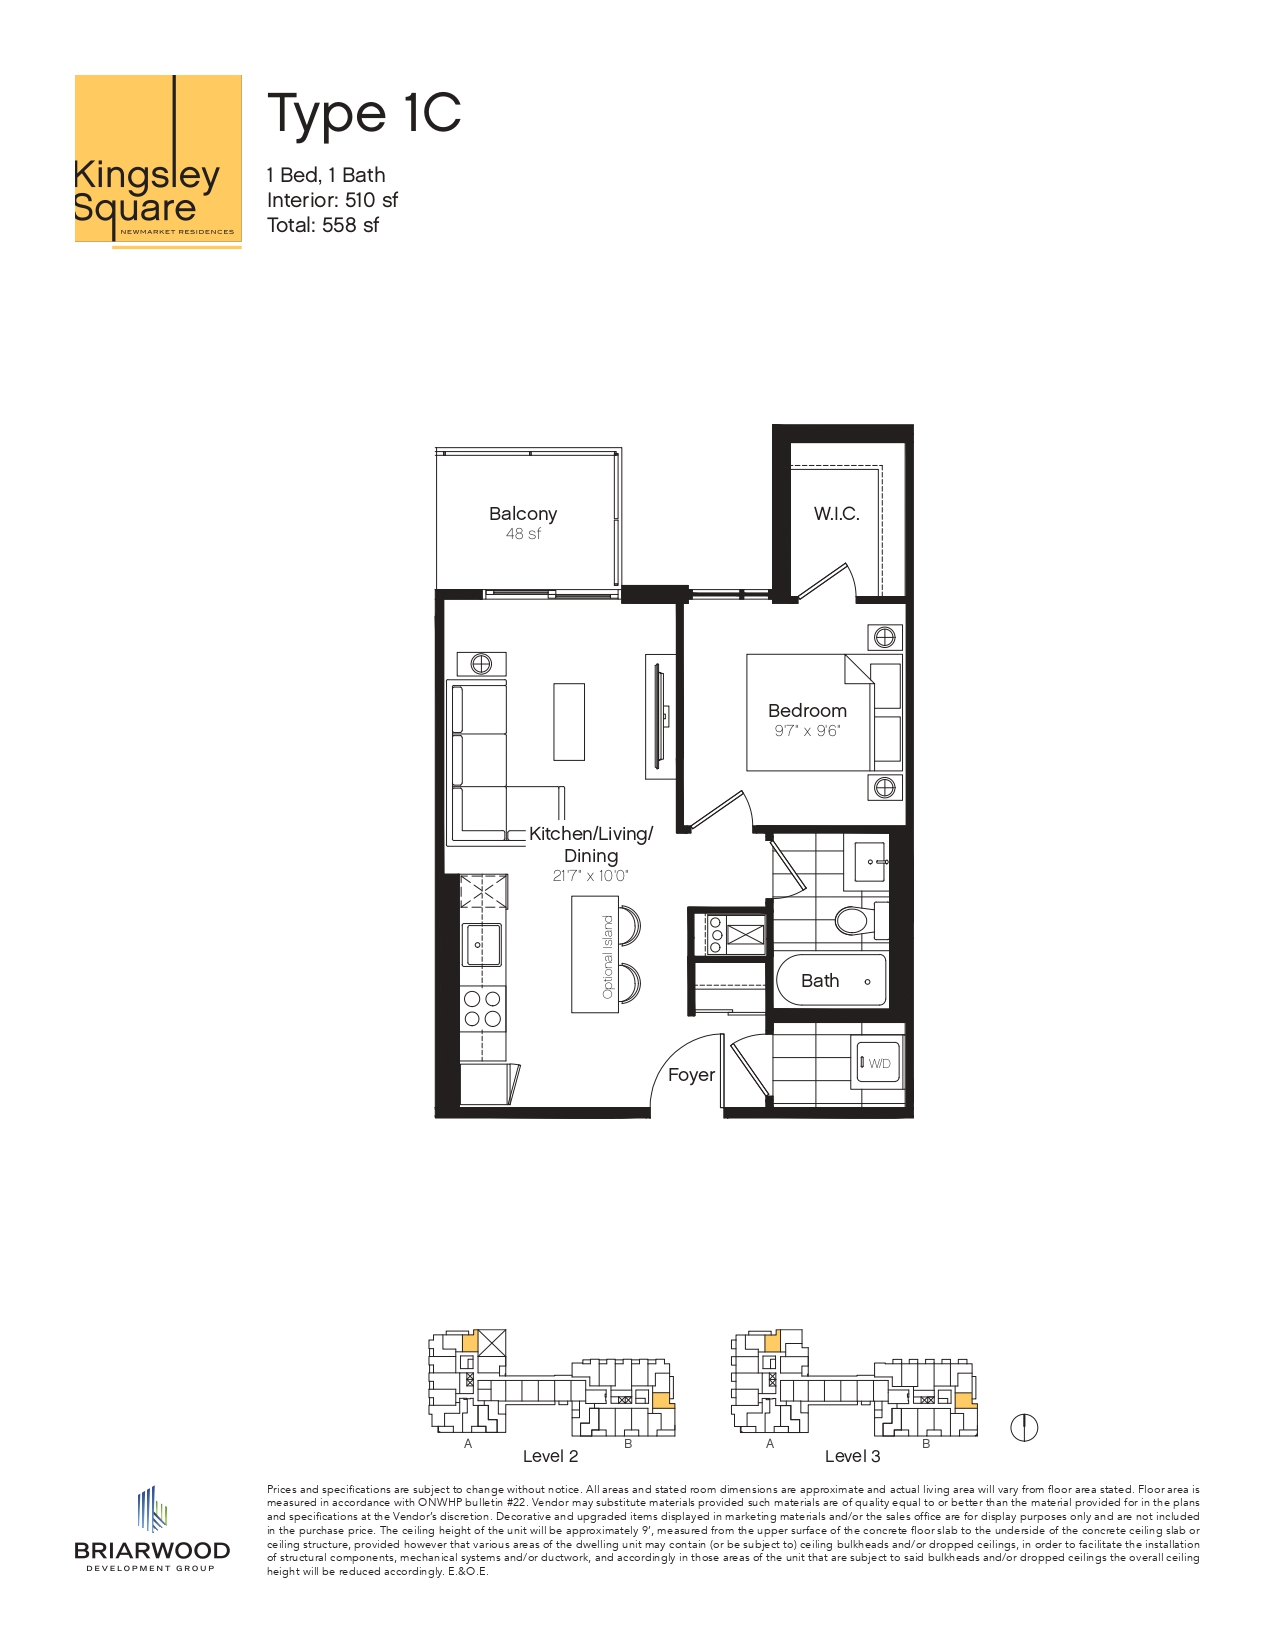 1C Floor Plan of Kingsley Square Condos with undefined beds